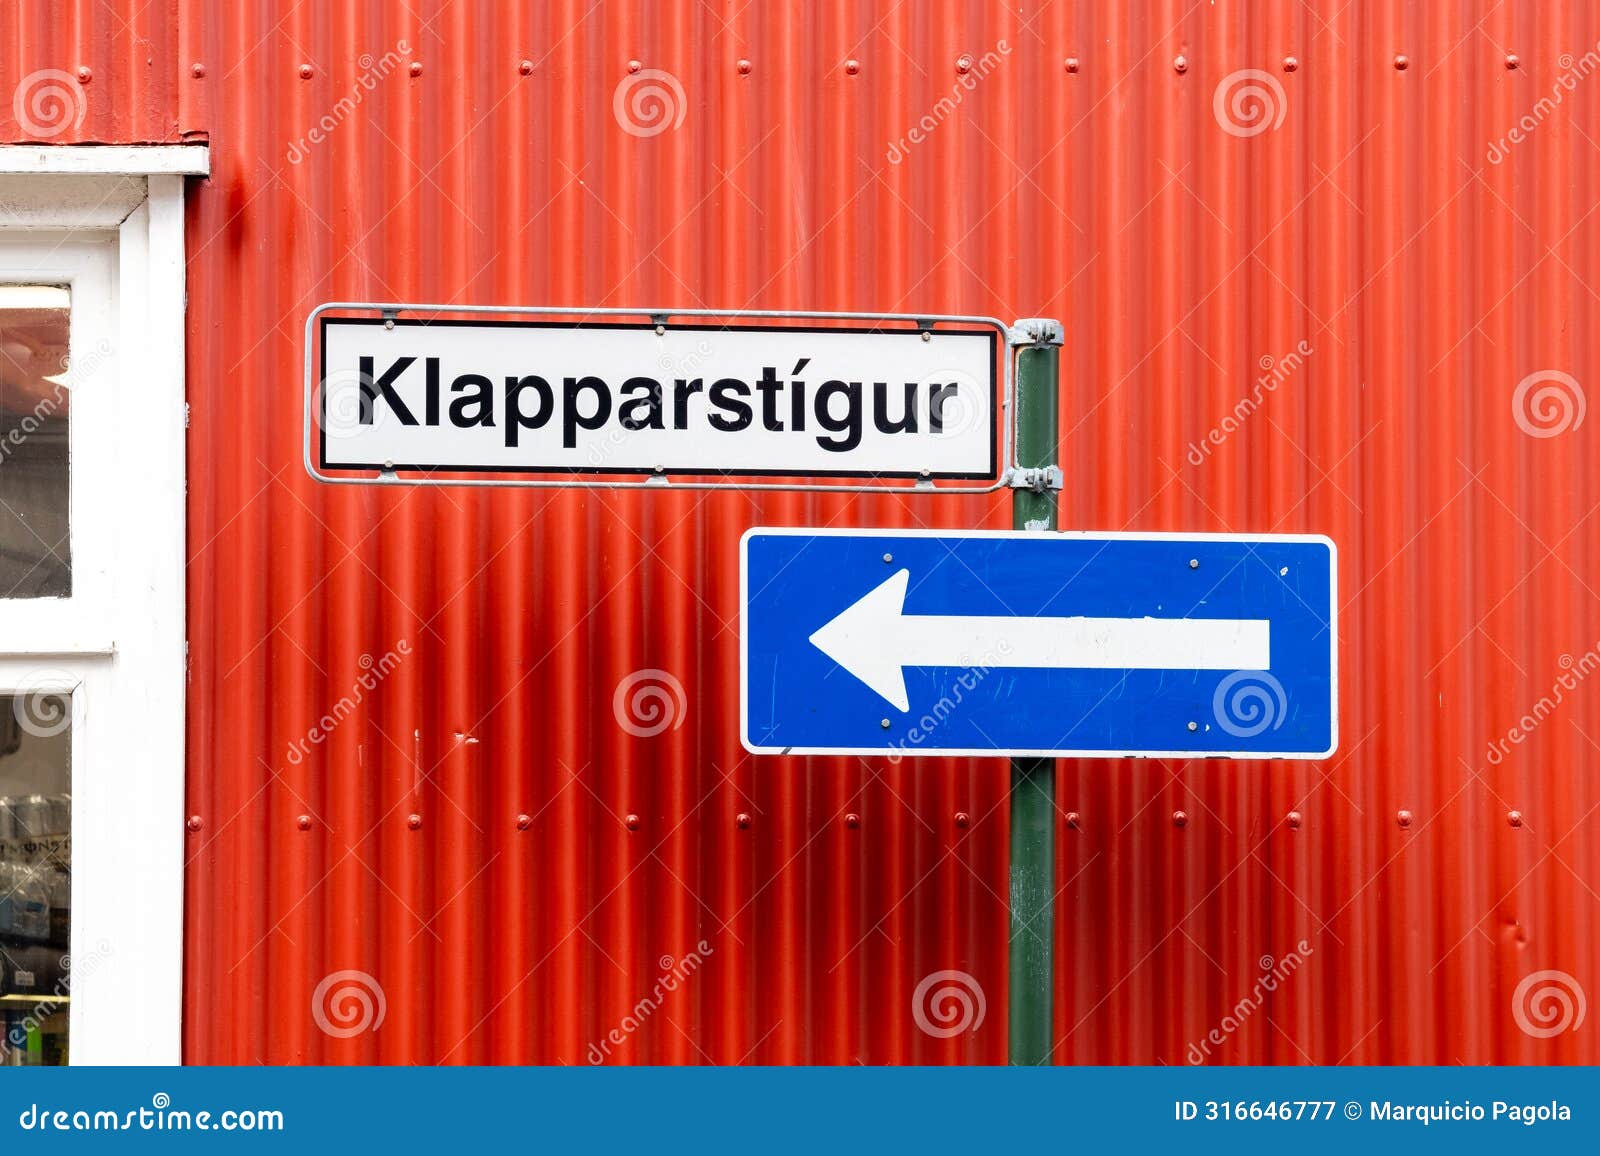 a street sign with the word klapparstigur on it is on a pole